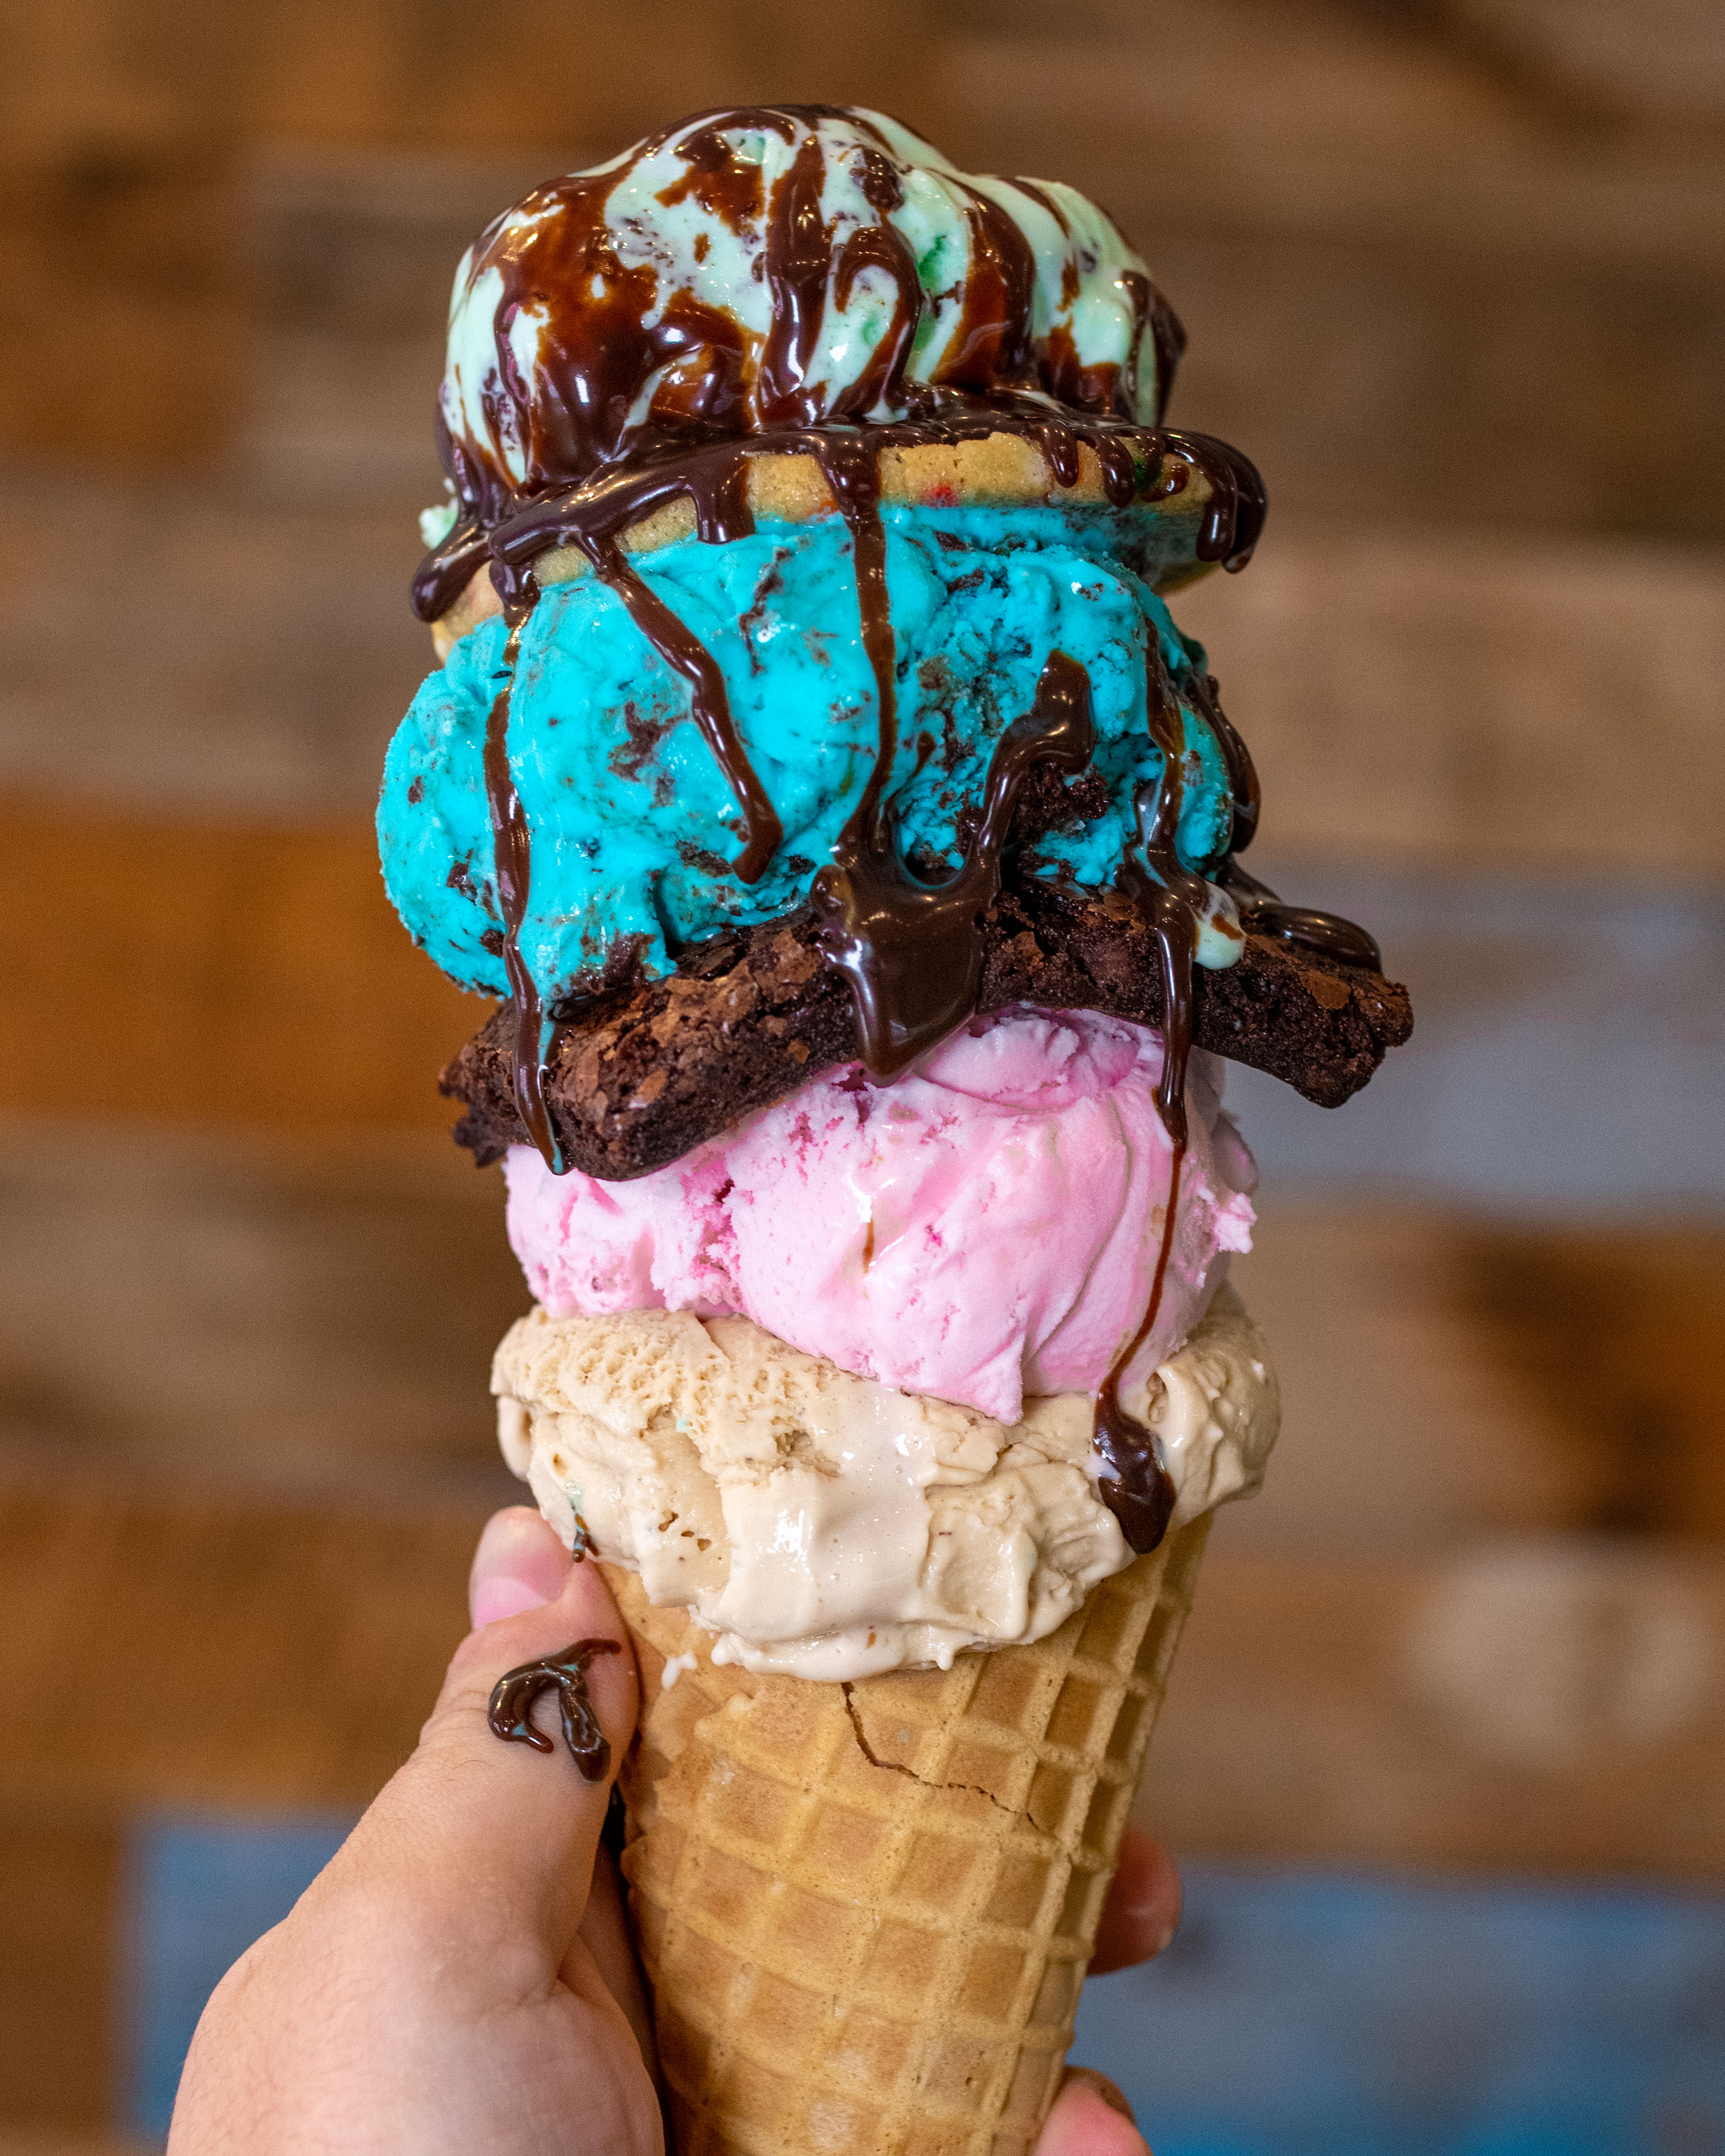 Best Ice Cream in San Francisco - The Baked Bear